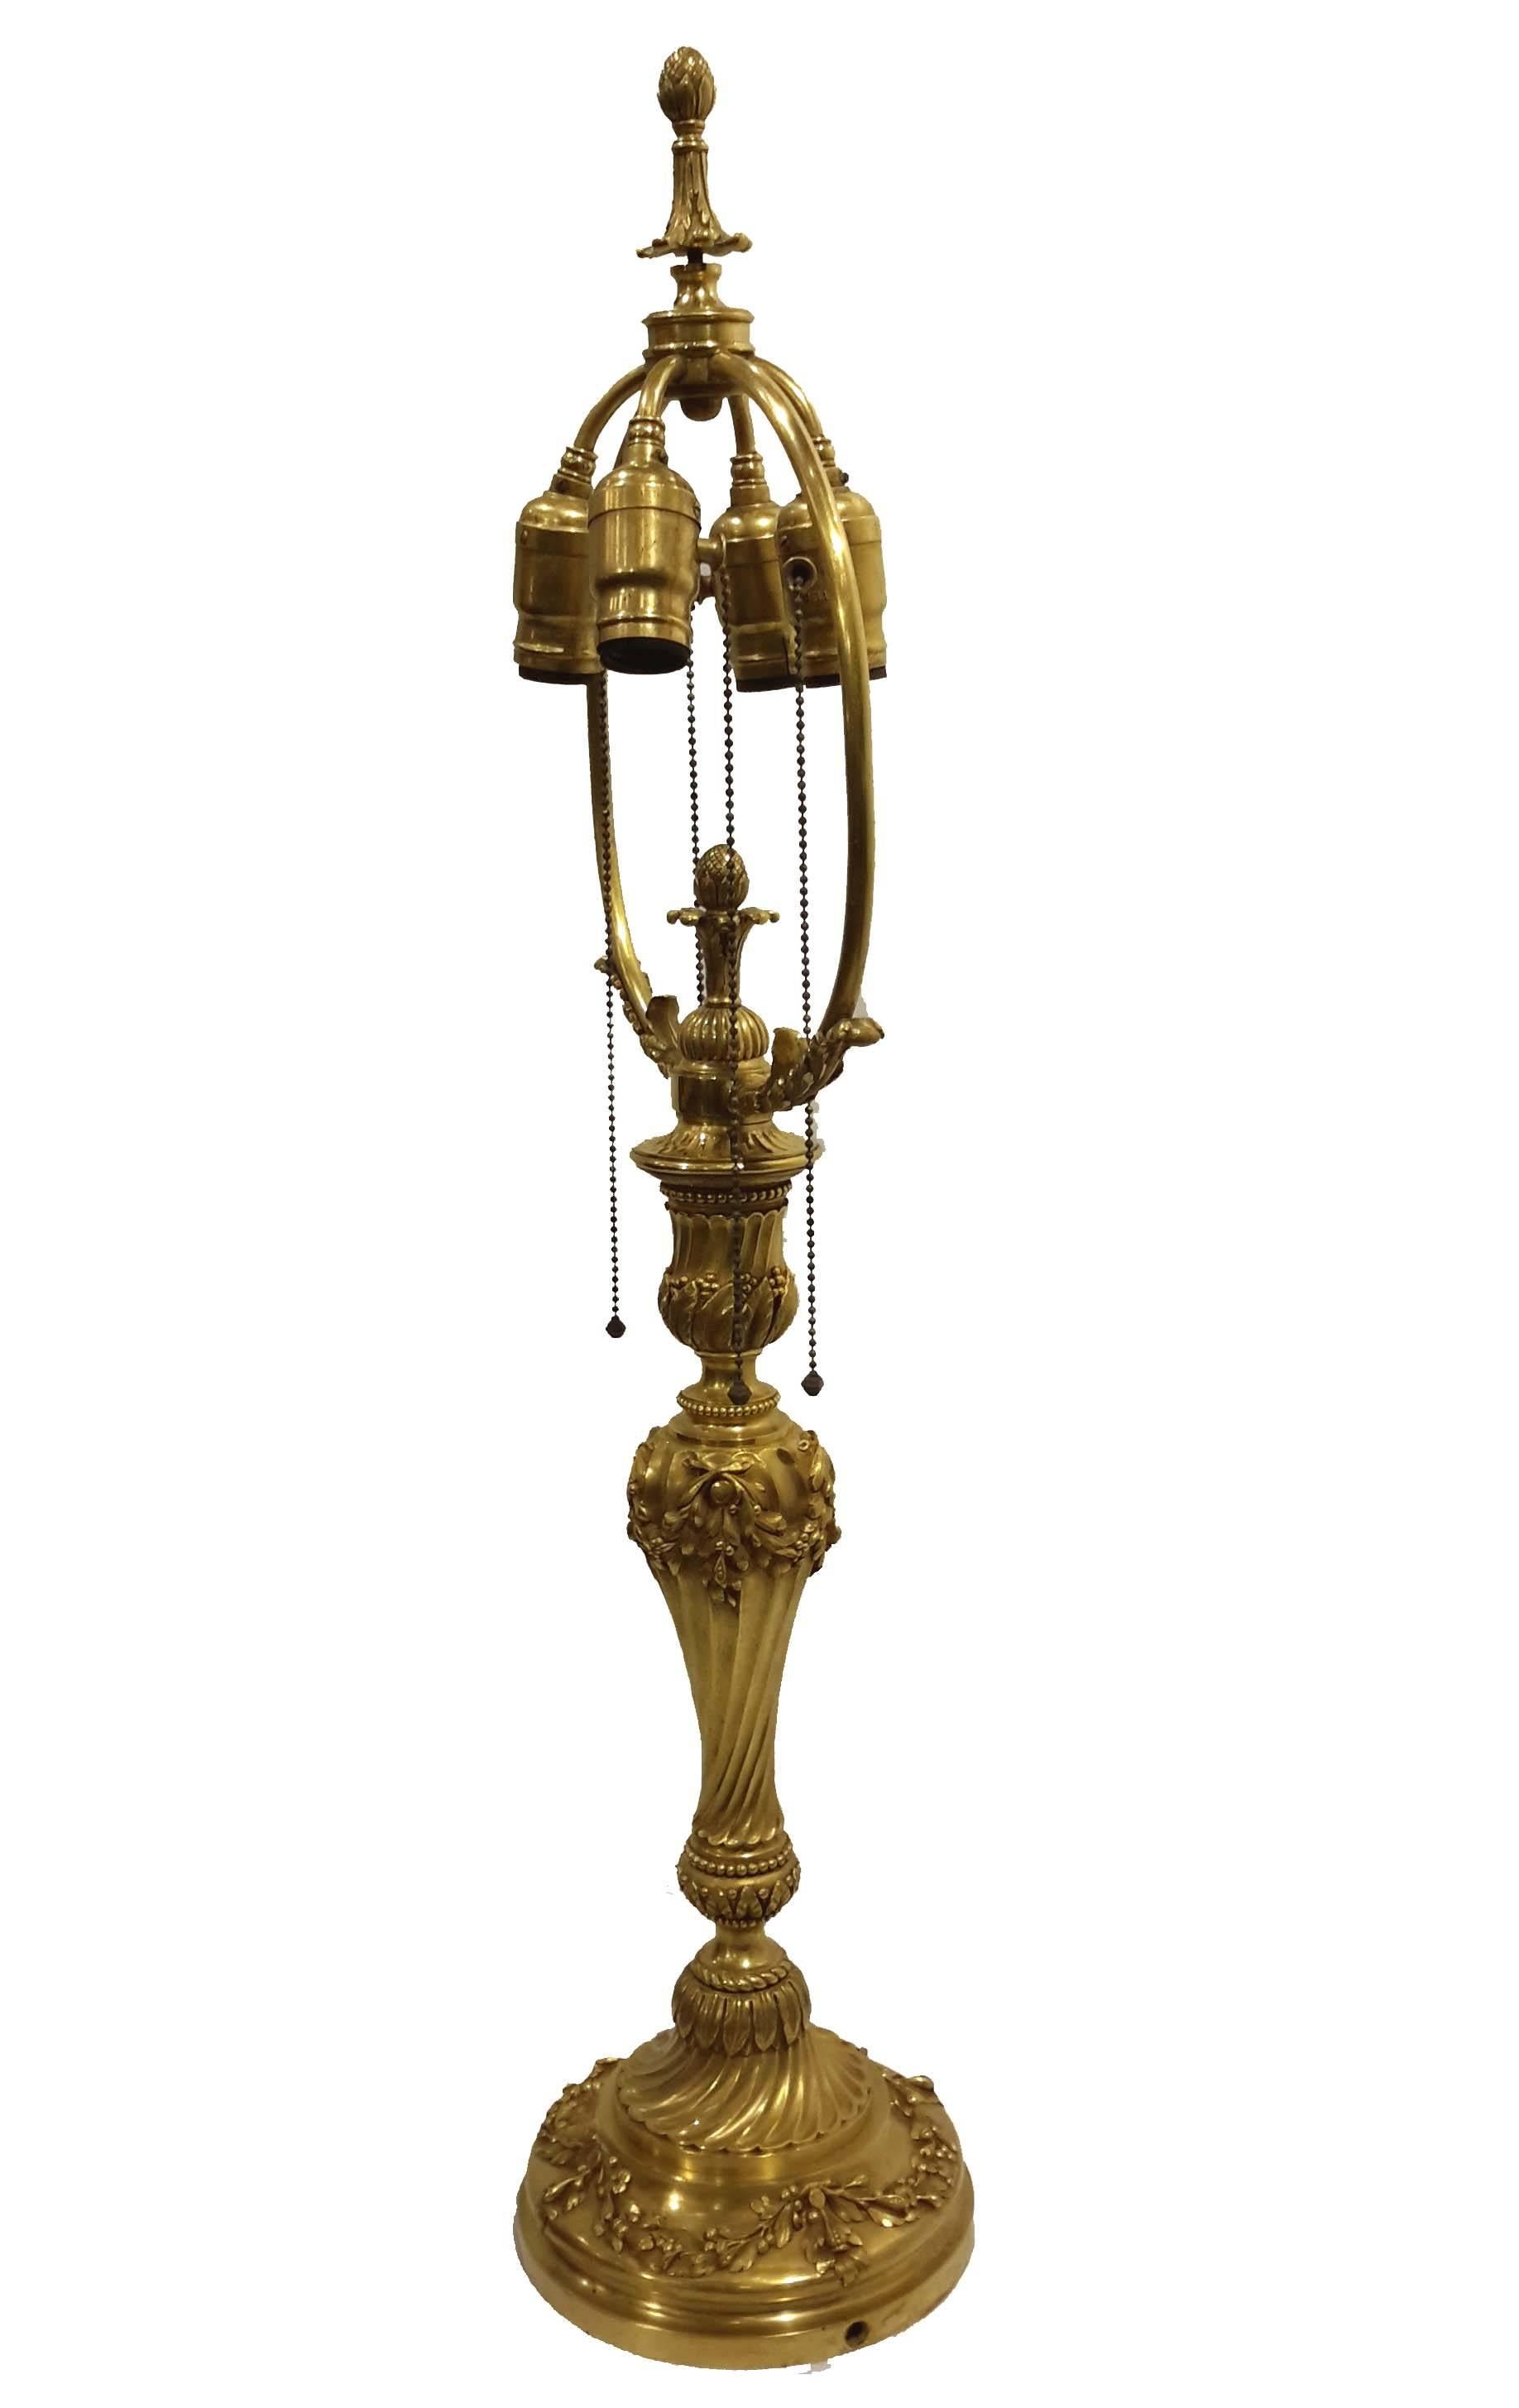 Great quality gilt bronze lamp attributed to E.F. Caldwell & Co. New York, circa 1890s.
Wonderful details in Louis XVI style. Rewired.